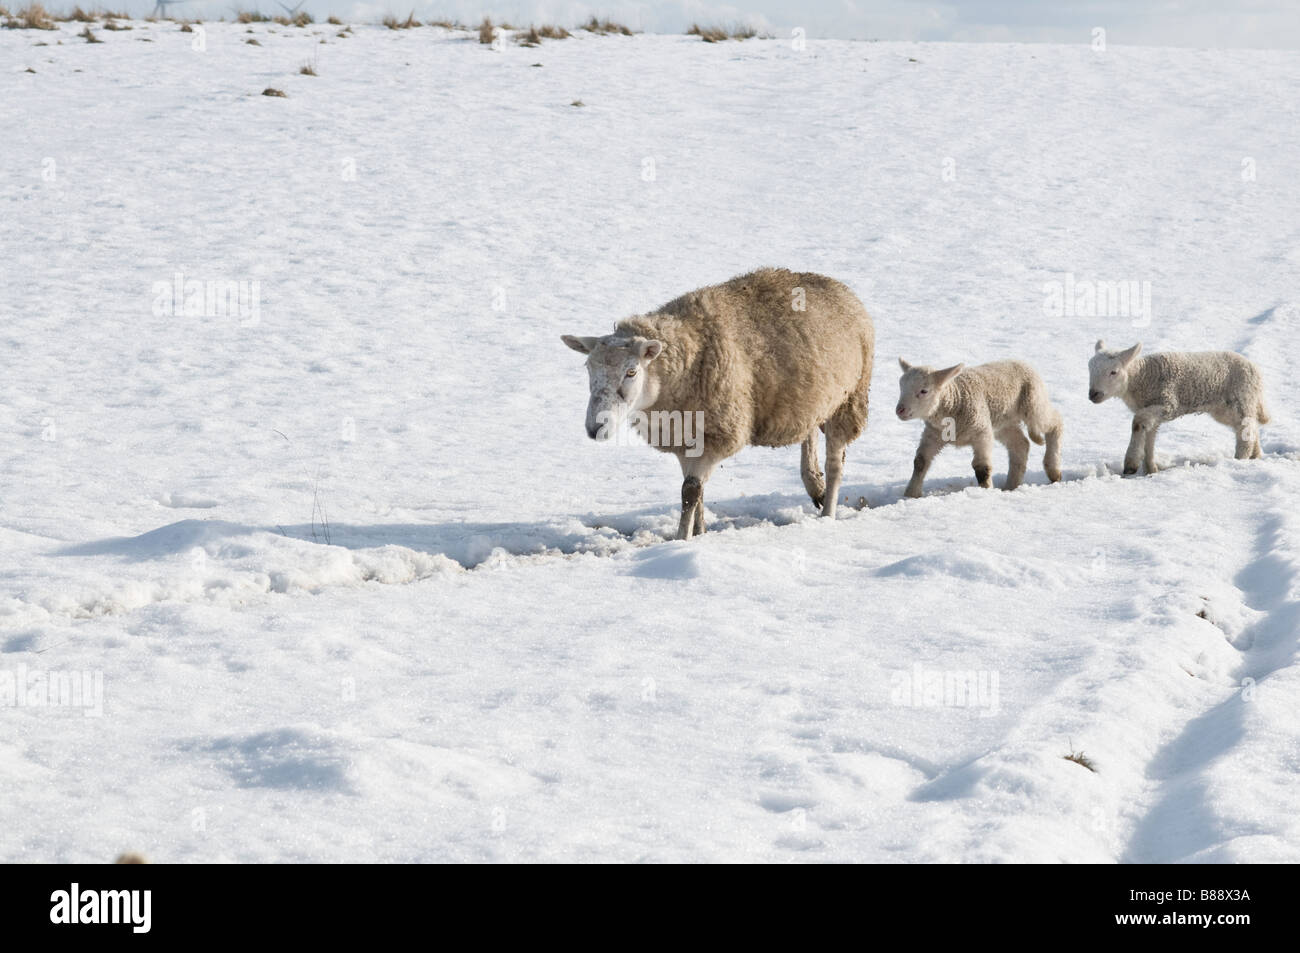 A mummy sheep with two small lambs in the snow Stock Photo